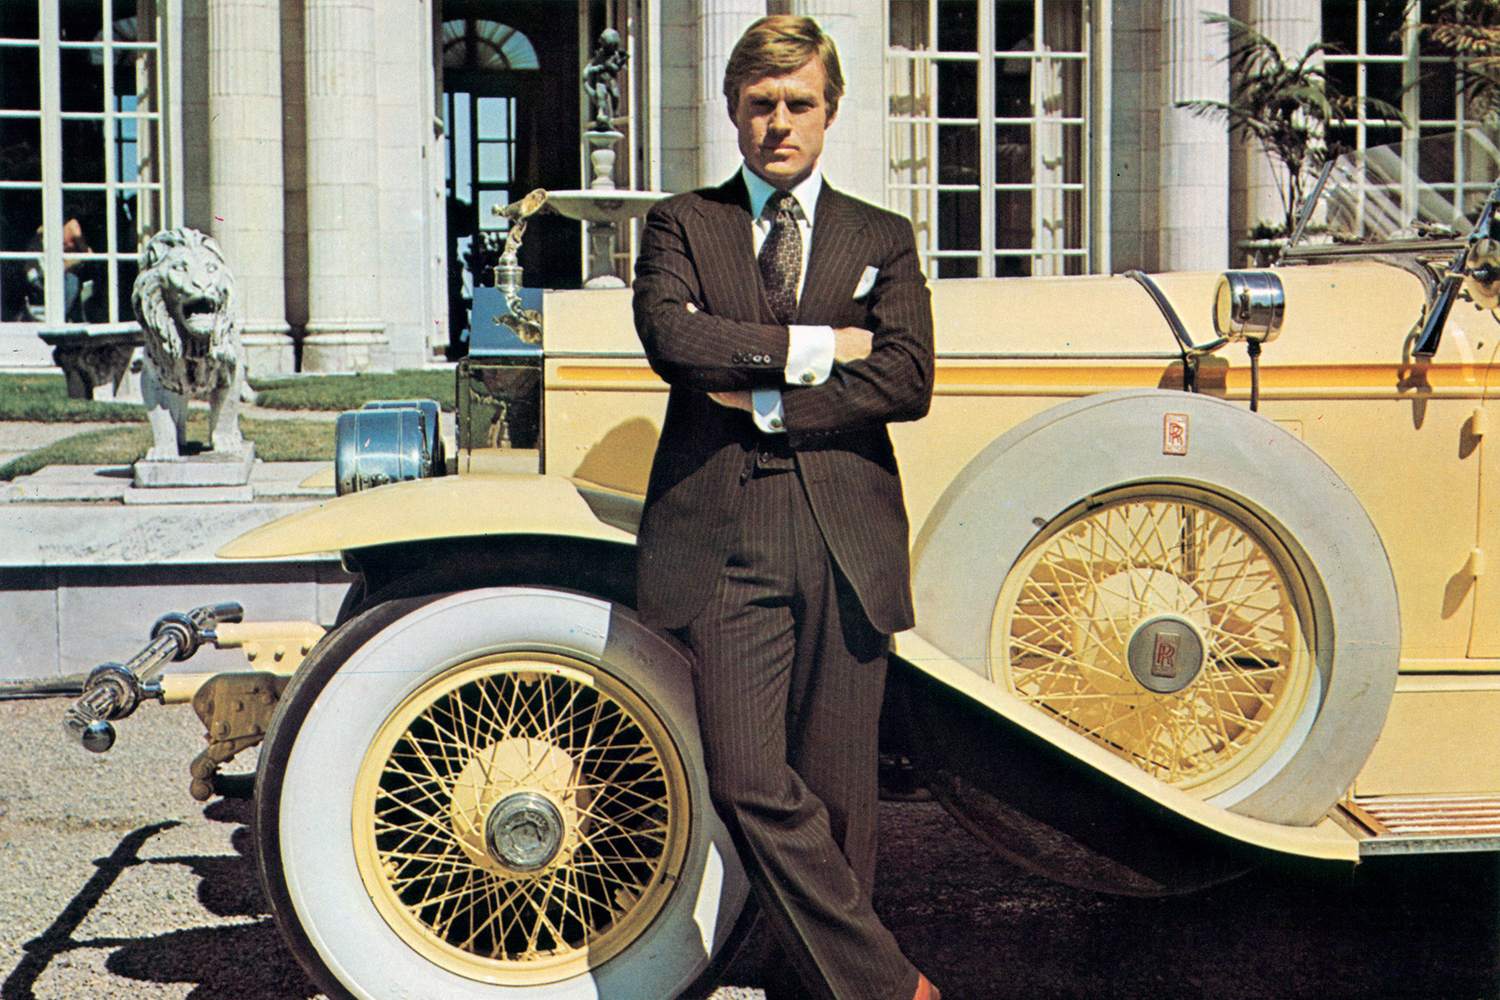 Robert Redford as Jay Gatsby in the 1974 movie adaptation of "The Great Gatsby" stands next to a yellow Rolls-Royce